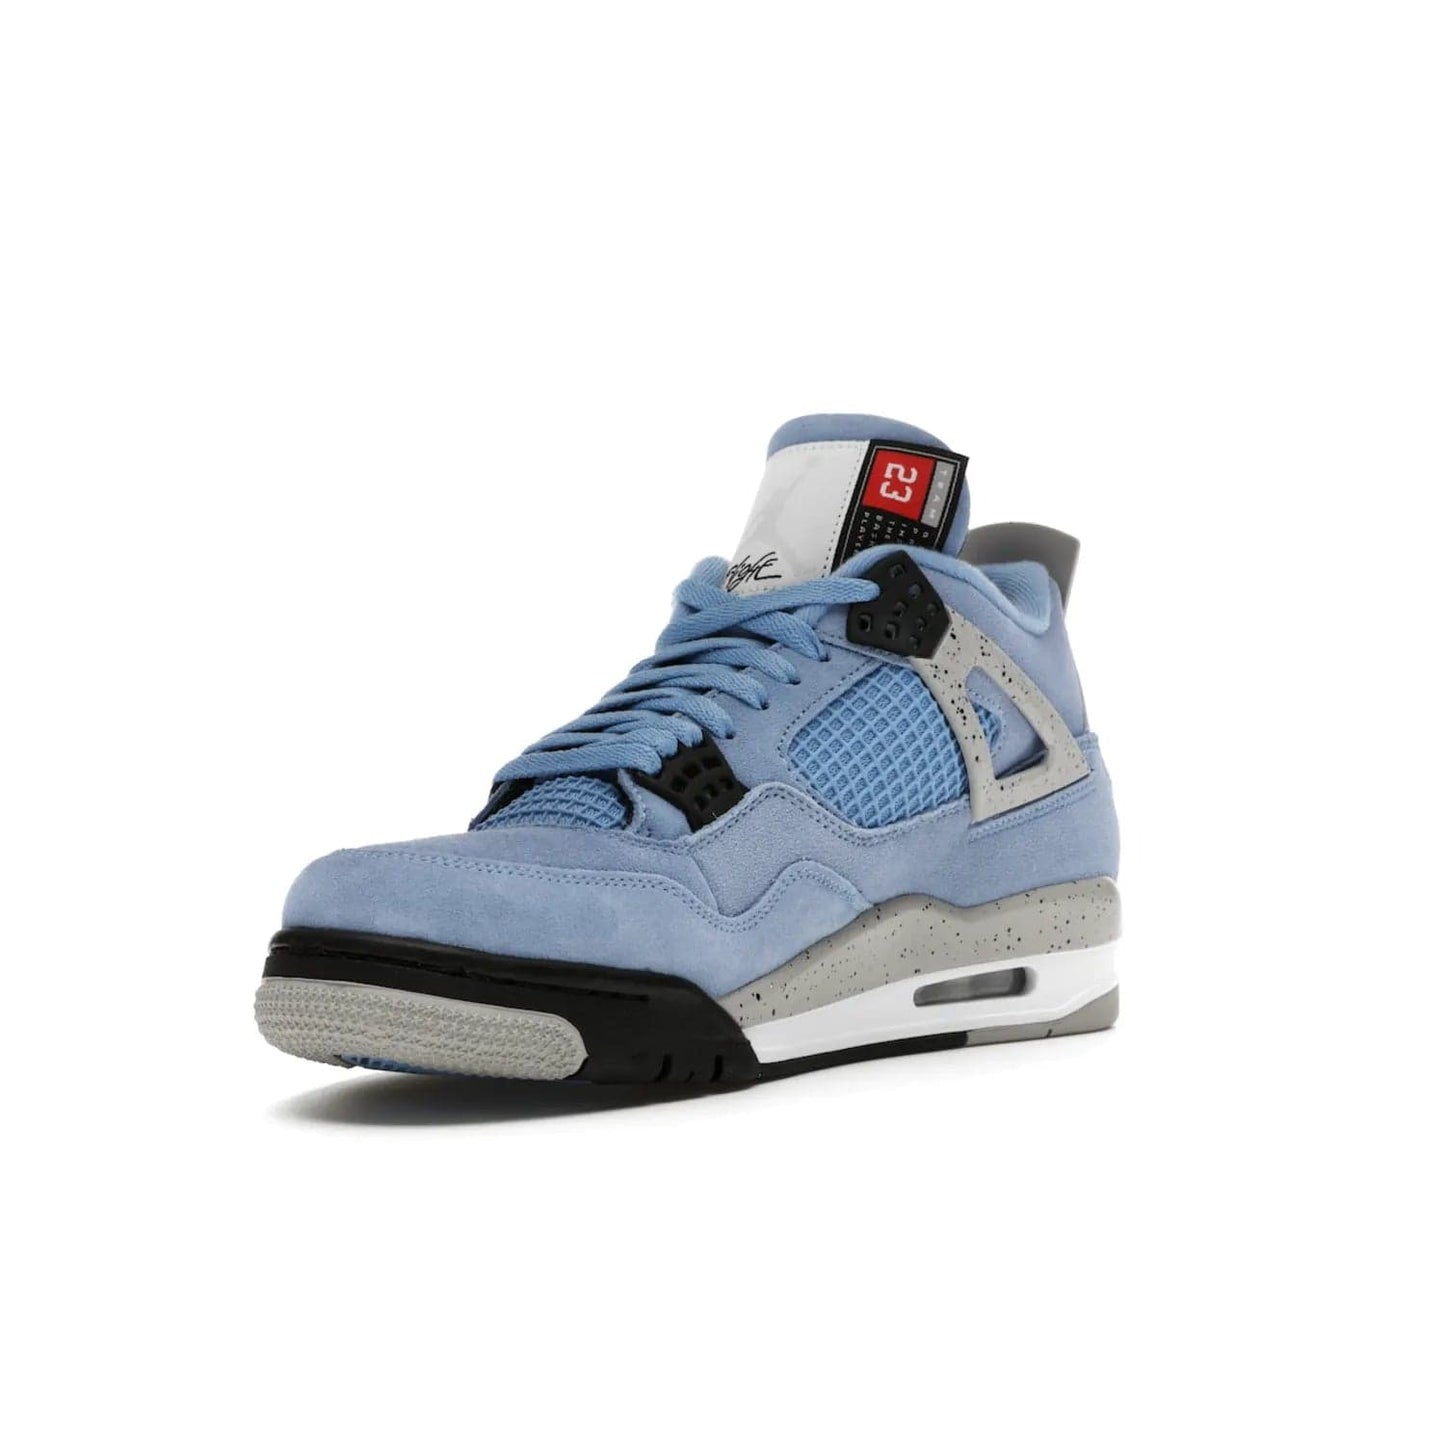 Jordan 4 Retro University Blue - Image 14 - Only at www.BallersClubKickz.com - The Air Jordan 4 University Blue honors MJ's alma mater. Rich University Blue suede, panels of netting, and Cement Grey speckled eyelets give this design an edgy look. Features a black, white and Tech Grey sole with a clear Air unit and two woven labels on the tongue. Jumpman logo & Team Jordan jock tag included. Released April 2021.